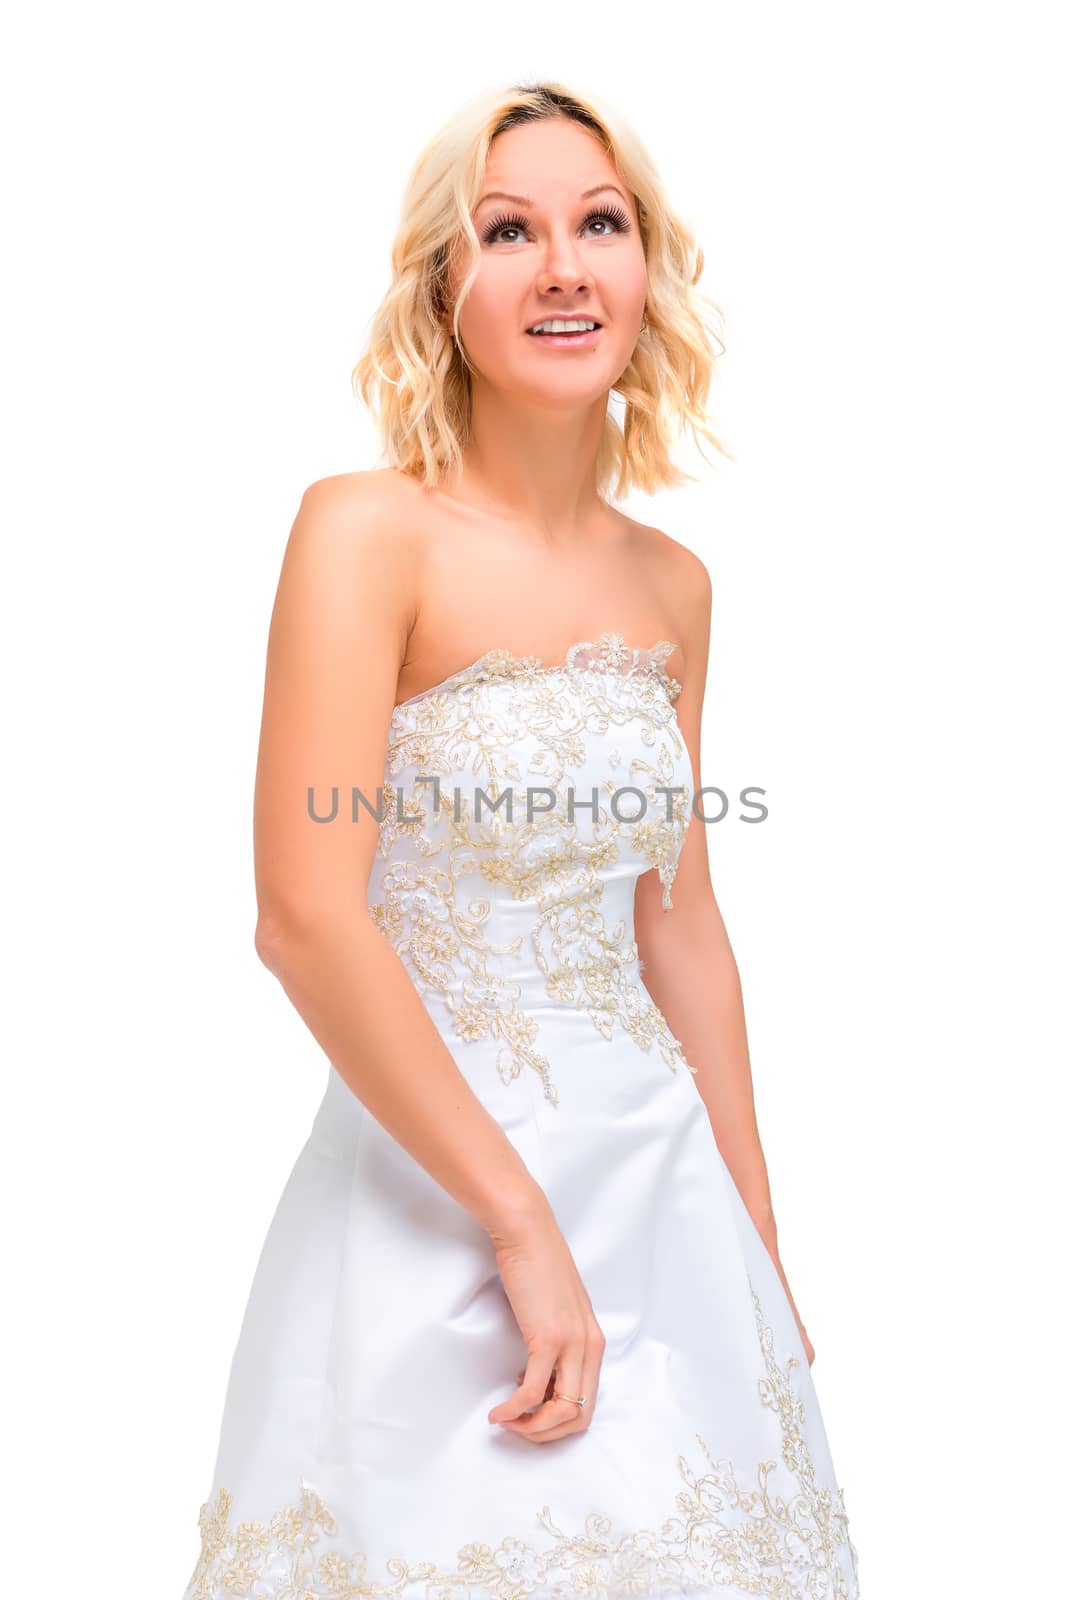 surprised facial expression at a young bride